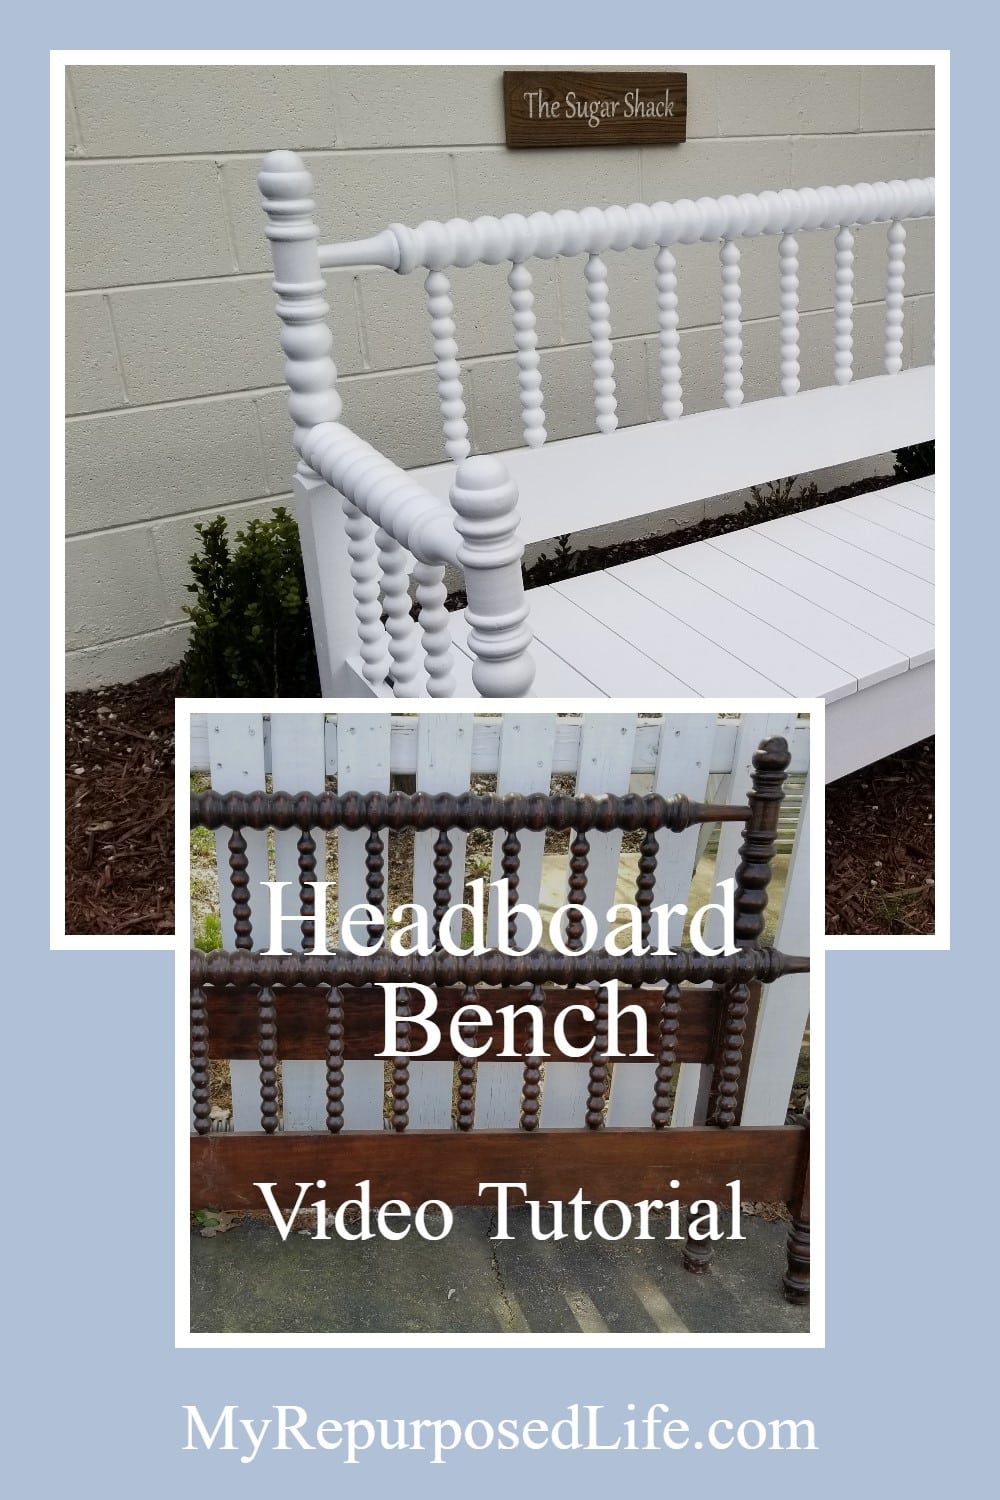 How to make a headboard bench out of a Jenny Lind bed using five basic power tools you may already have. Step by step directions will guide you through this weekend project. #MyRepurposedLife #5toolchallenge #repurposed #furniture #headboard #bench via @repurposedlife